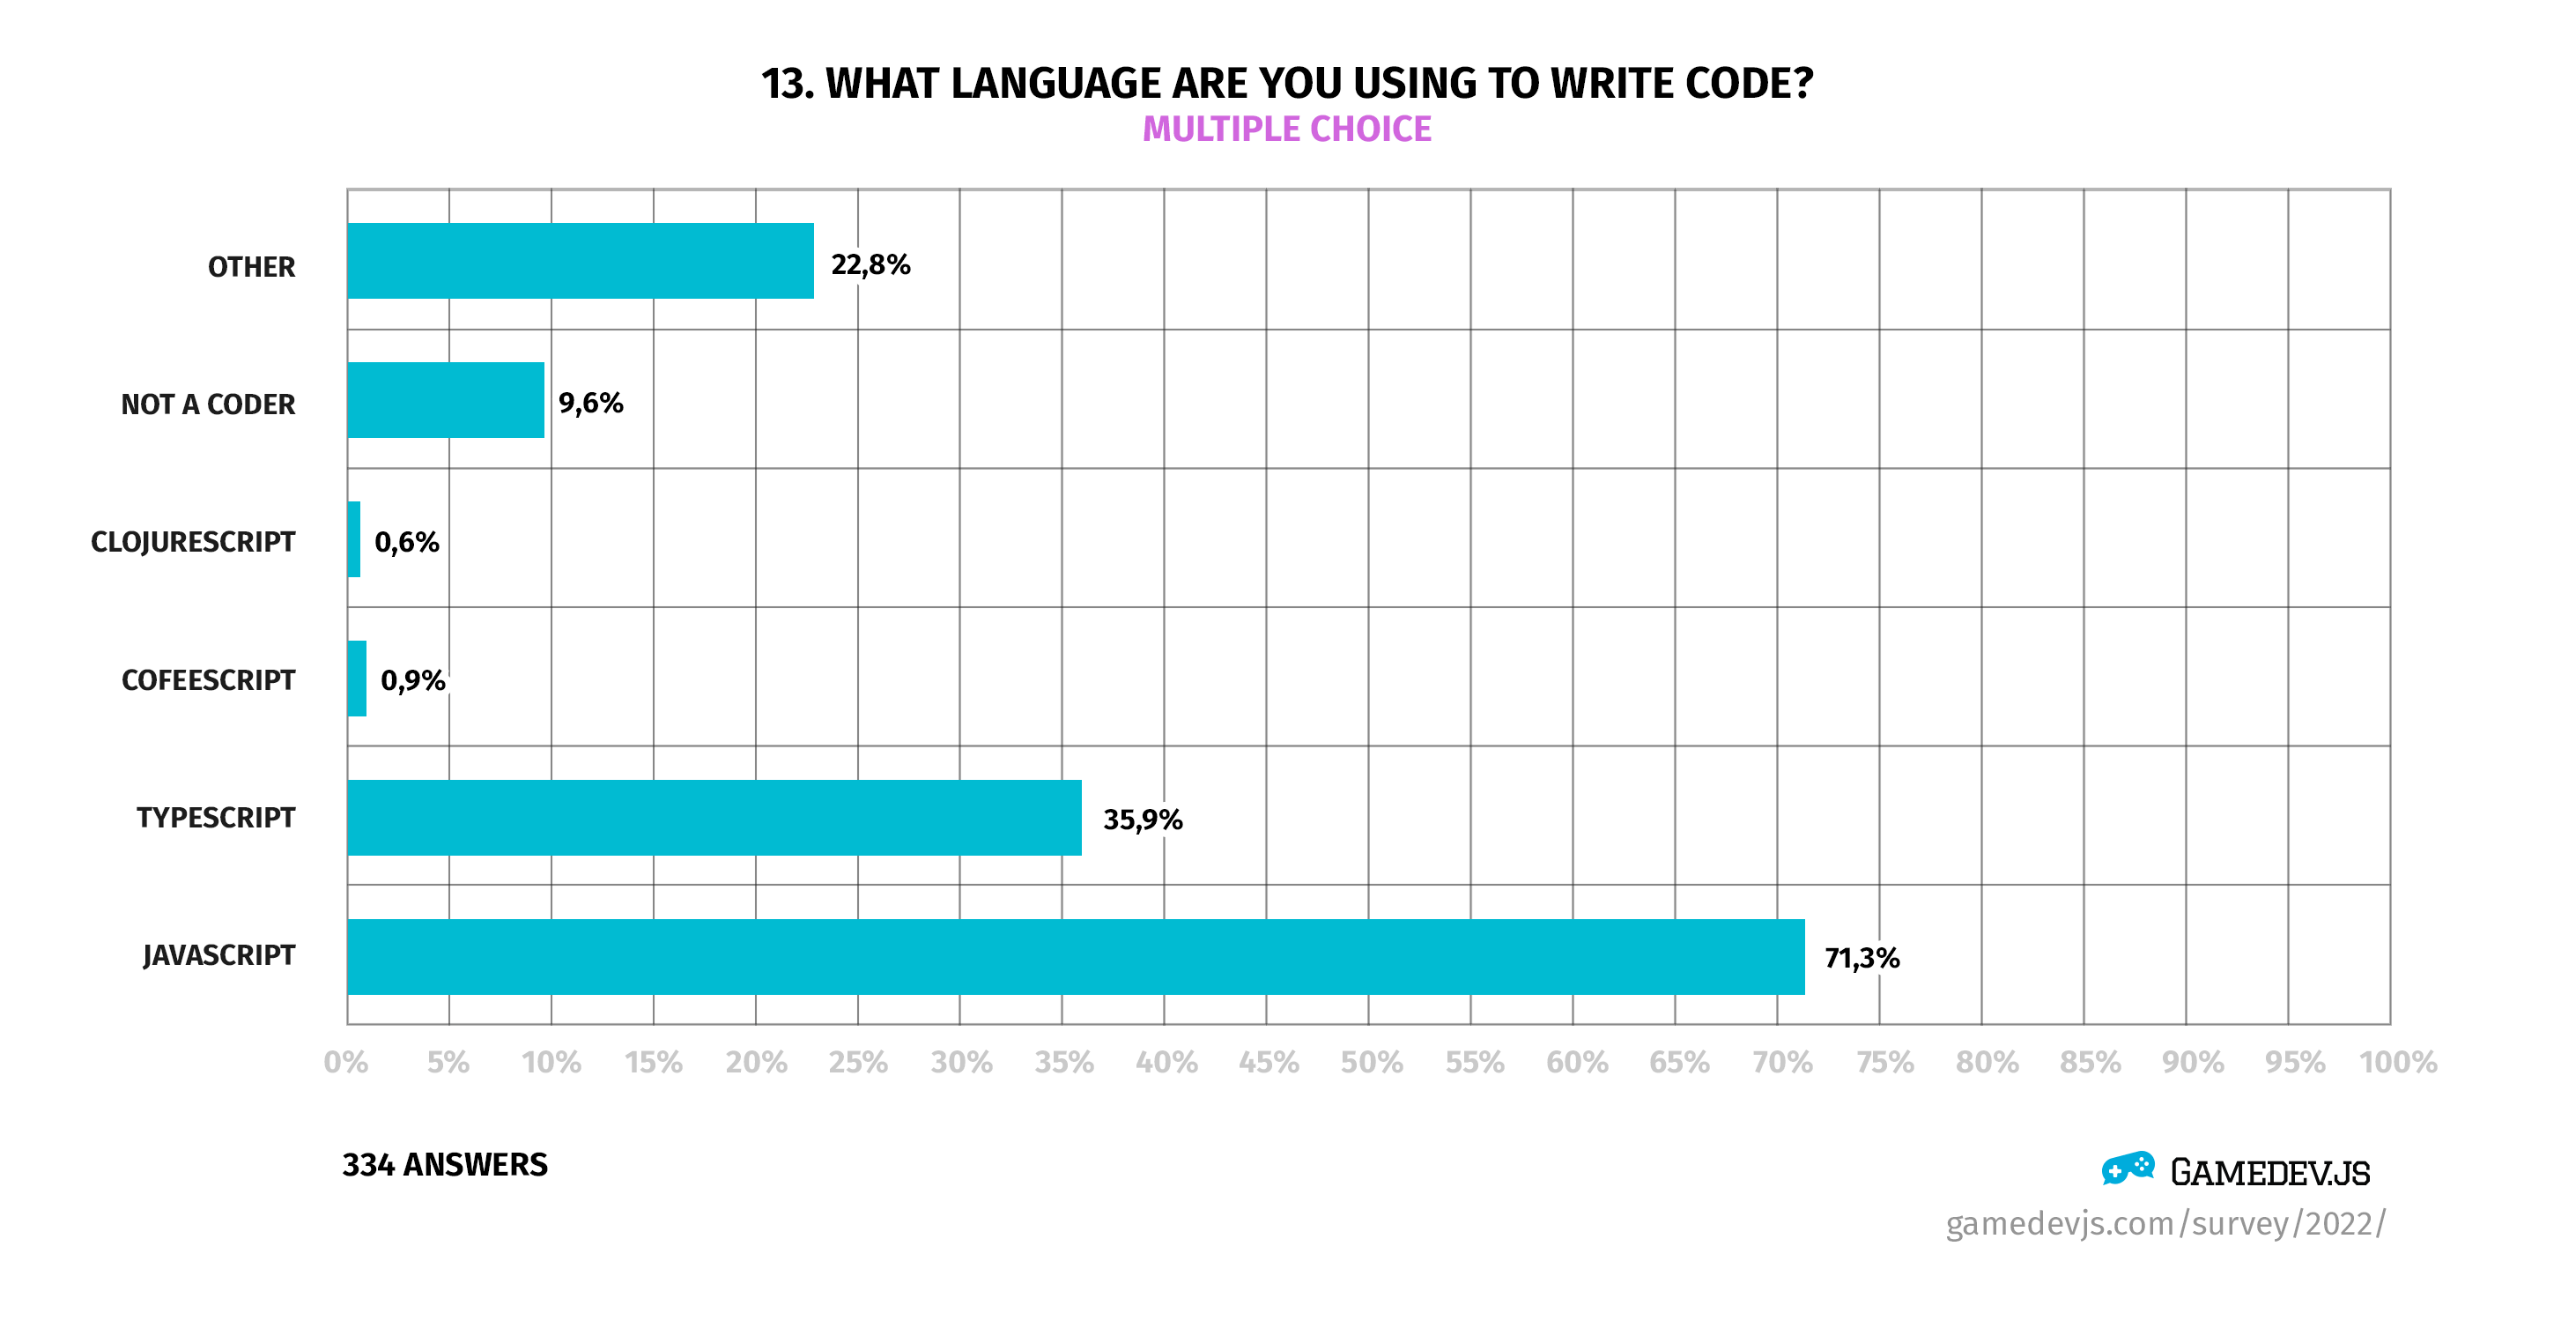 Gamedev.js Survey 2022 - Question #13: What language are you using to write code?